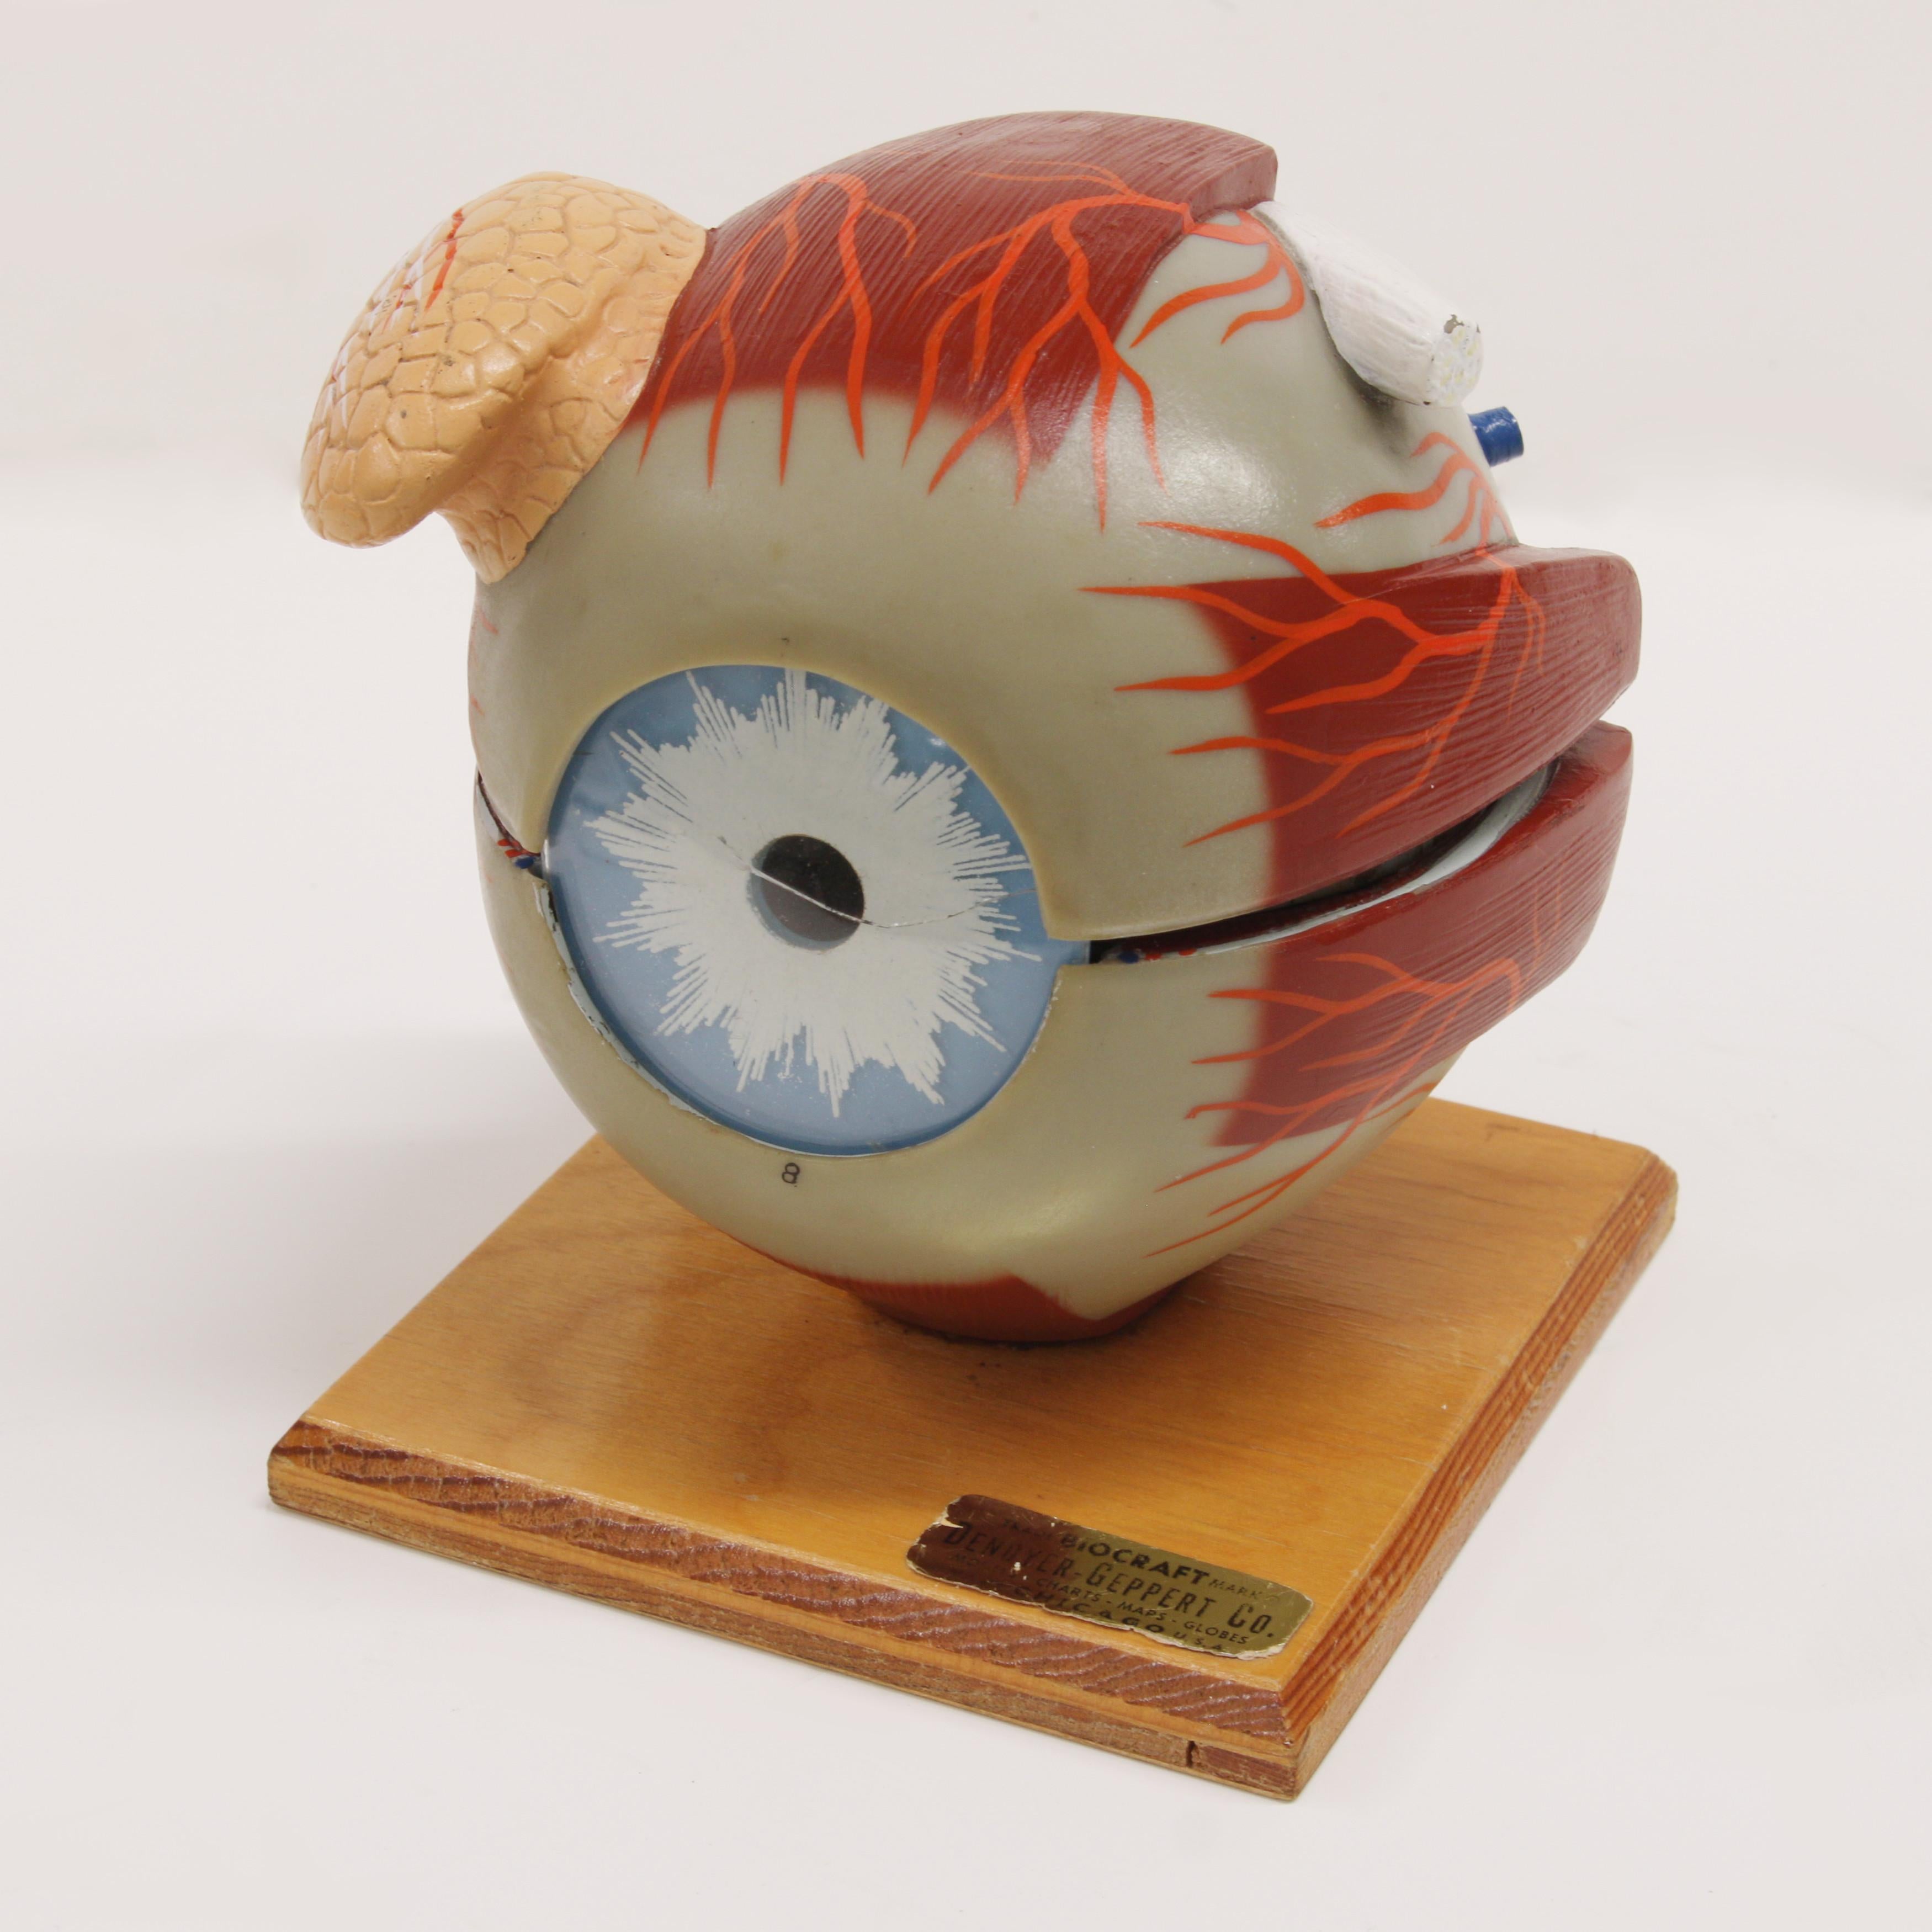 1960's Vintage Scientific Biocraft Human 3D Eyeball Model by Denoyer-Geppert of Chicago, Illinois. Hand-painted with wonderful original patina!